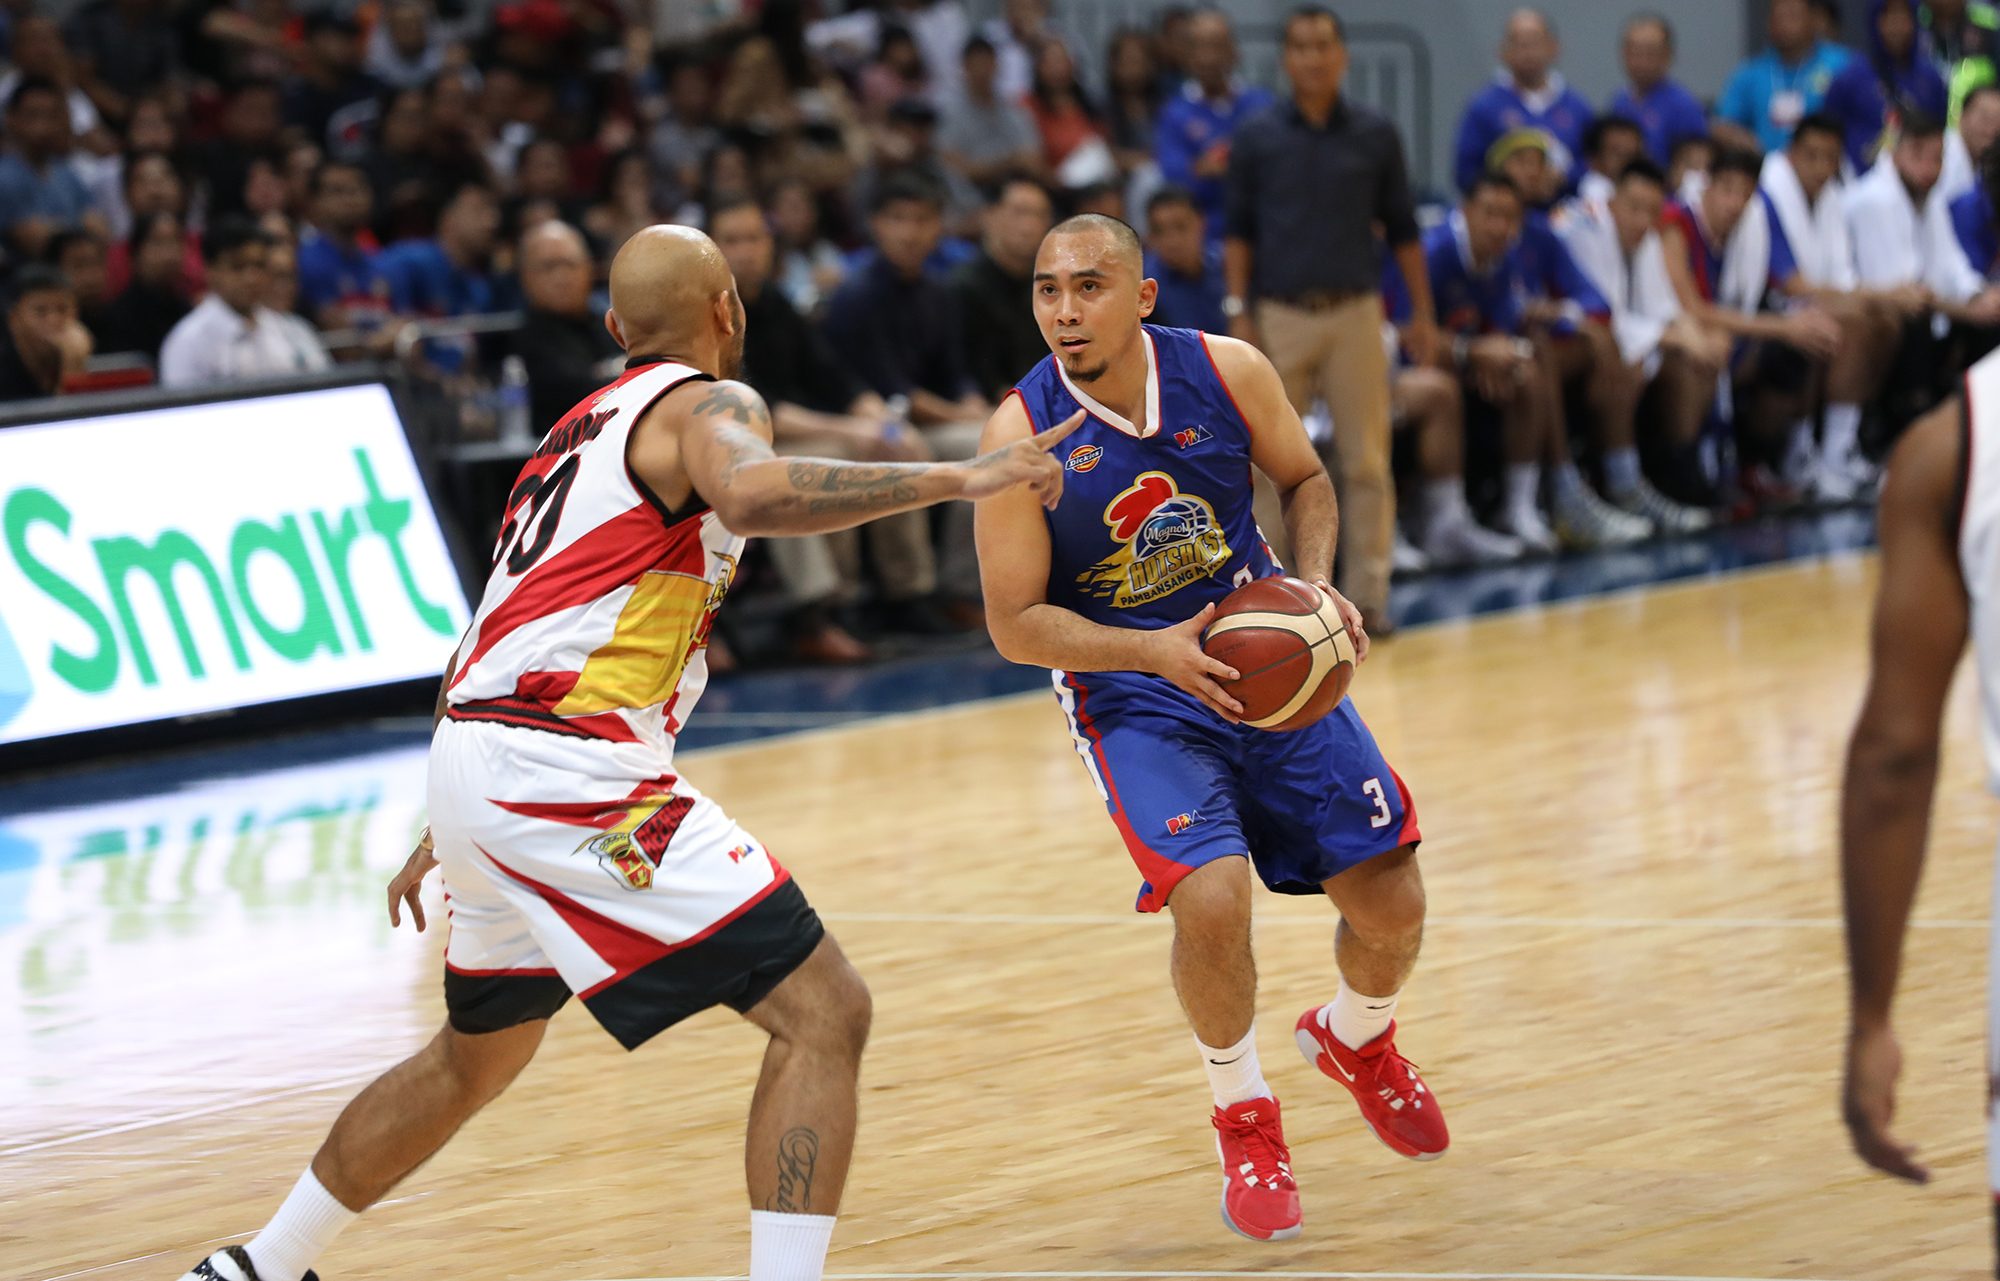 PBA banking on success of scrimmages for season opening